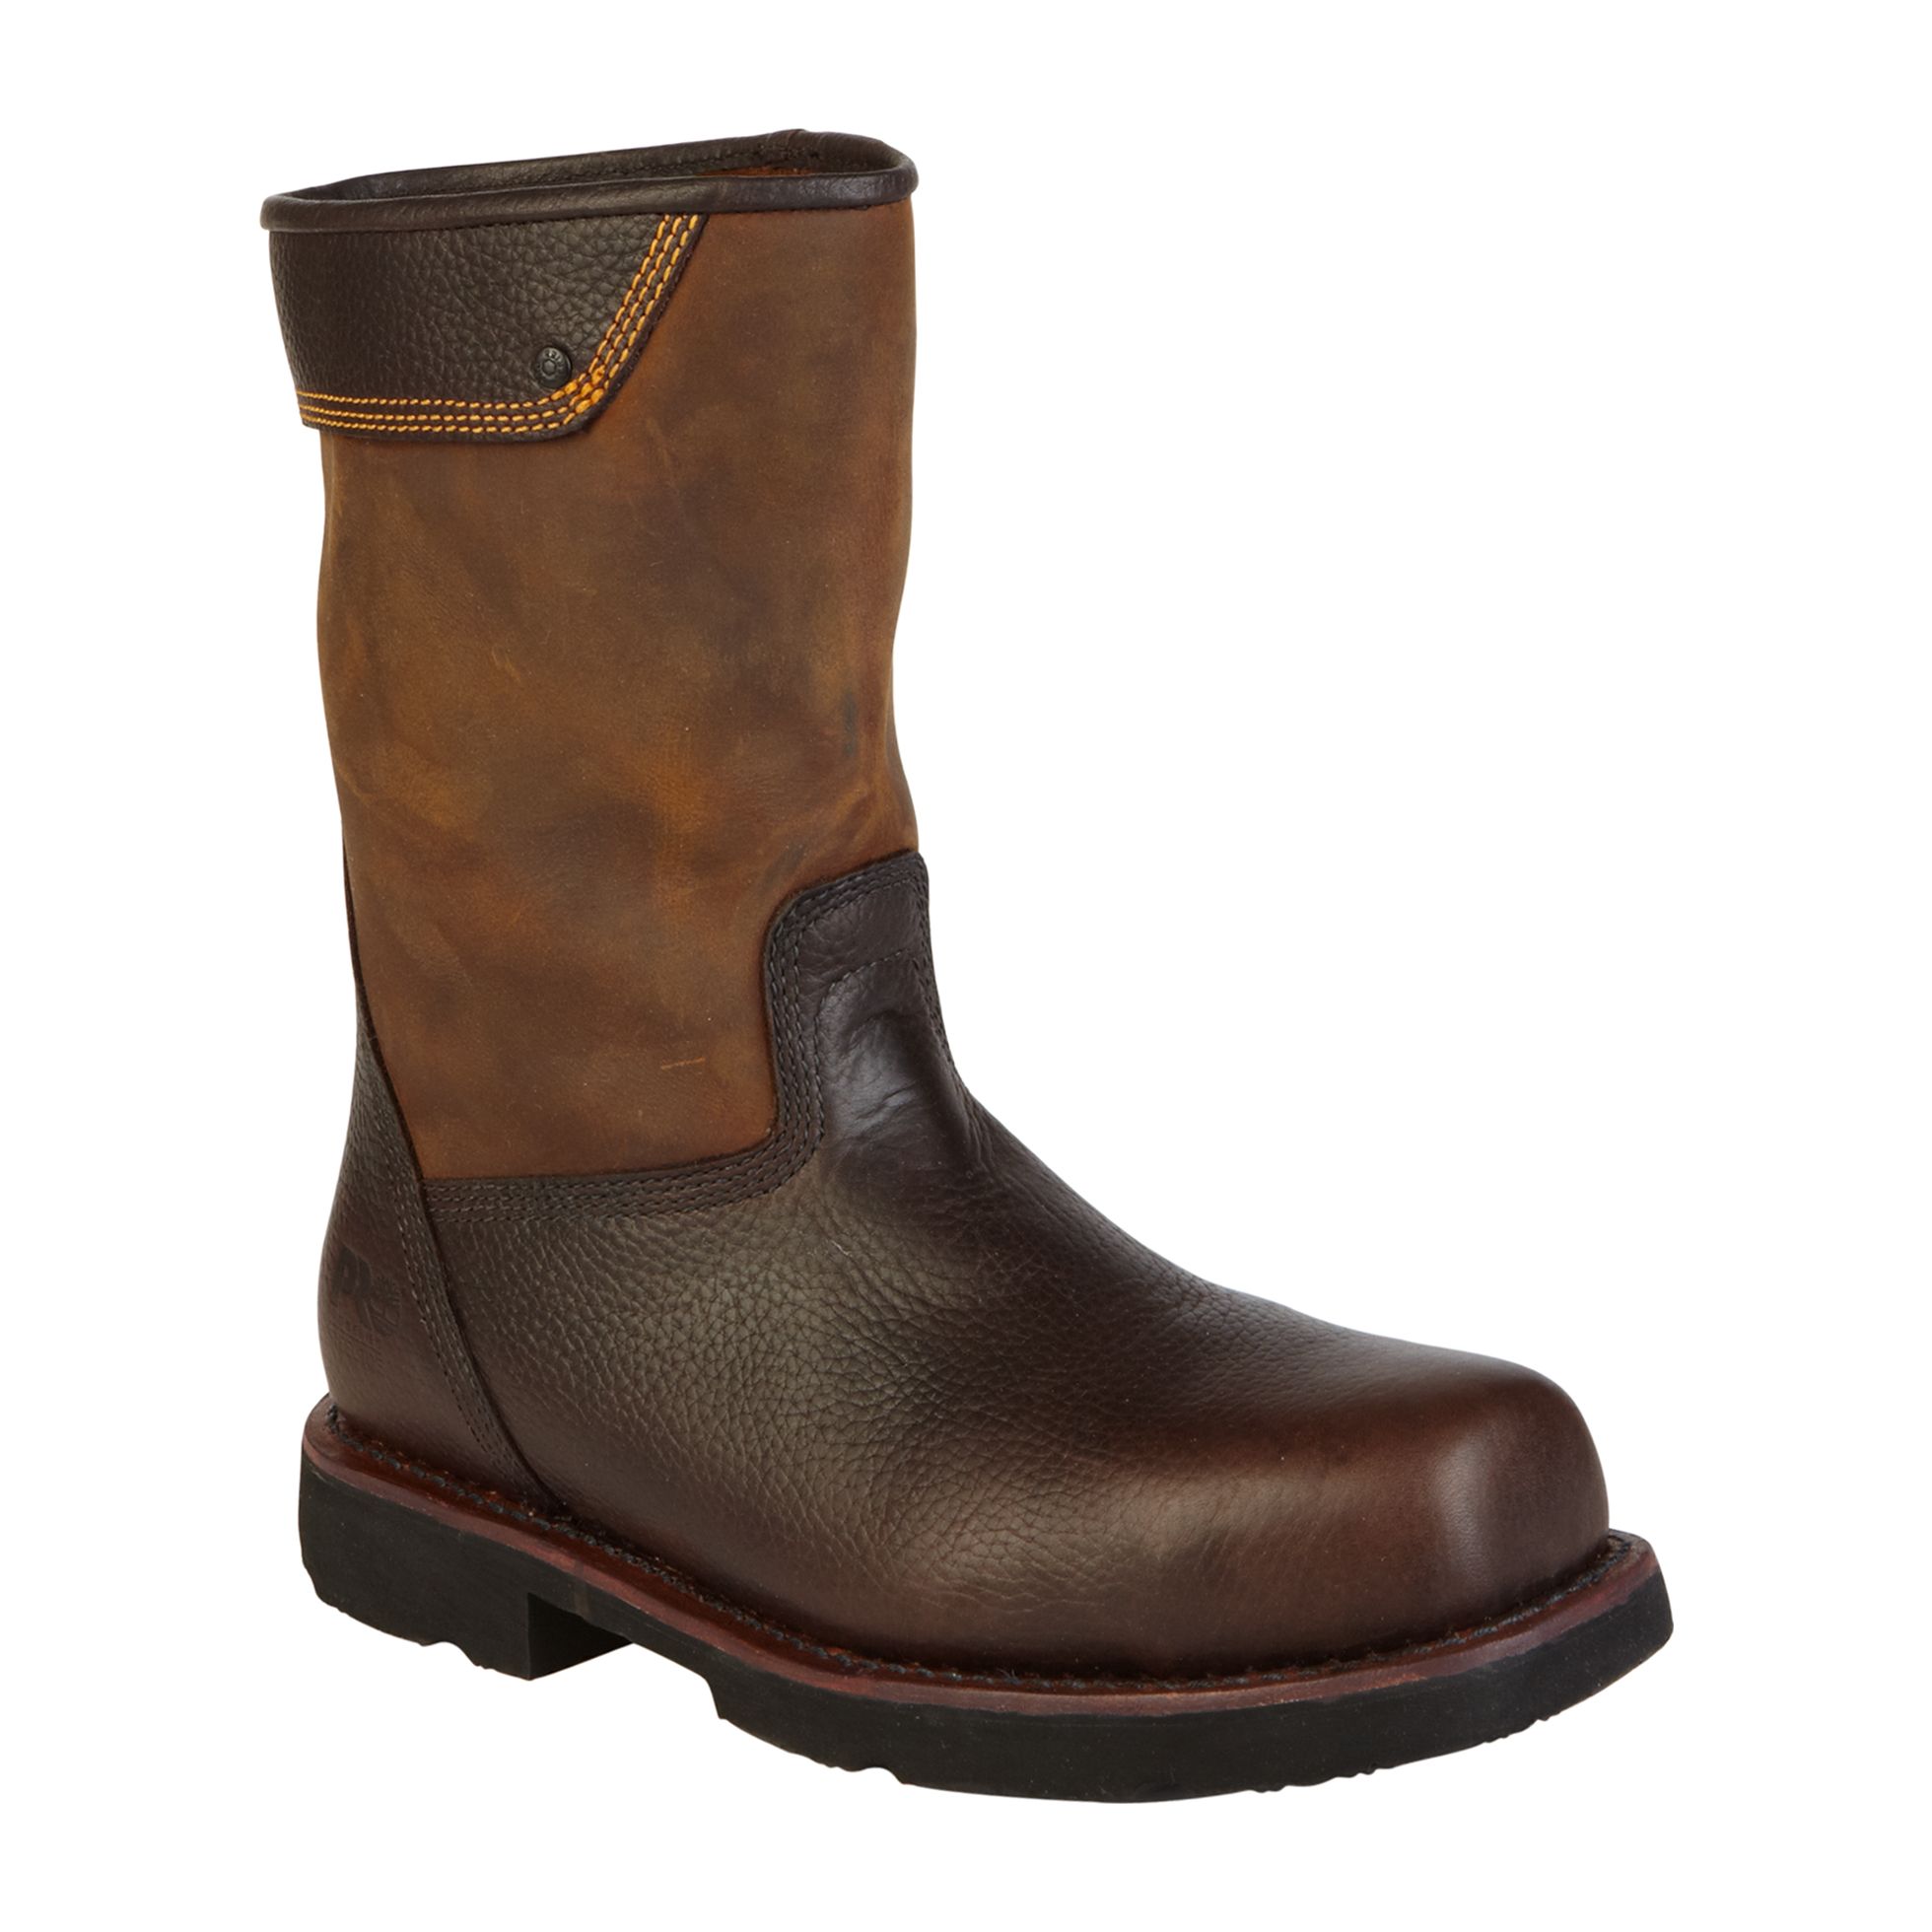 Men's Shoes: Get the Best Men's Boots at Sears